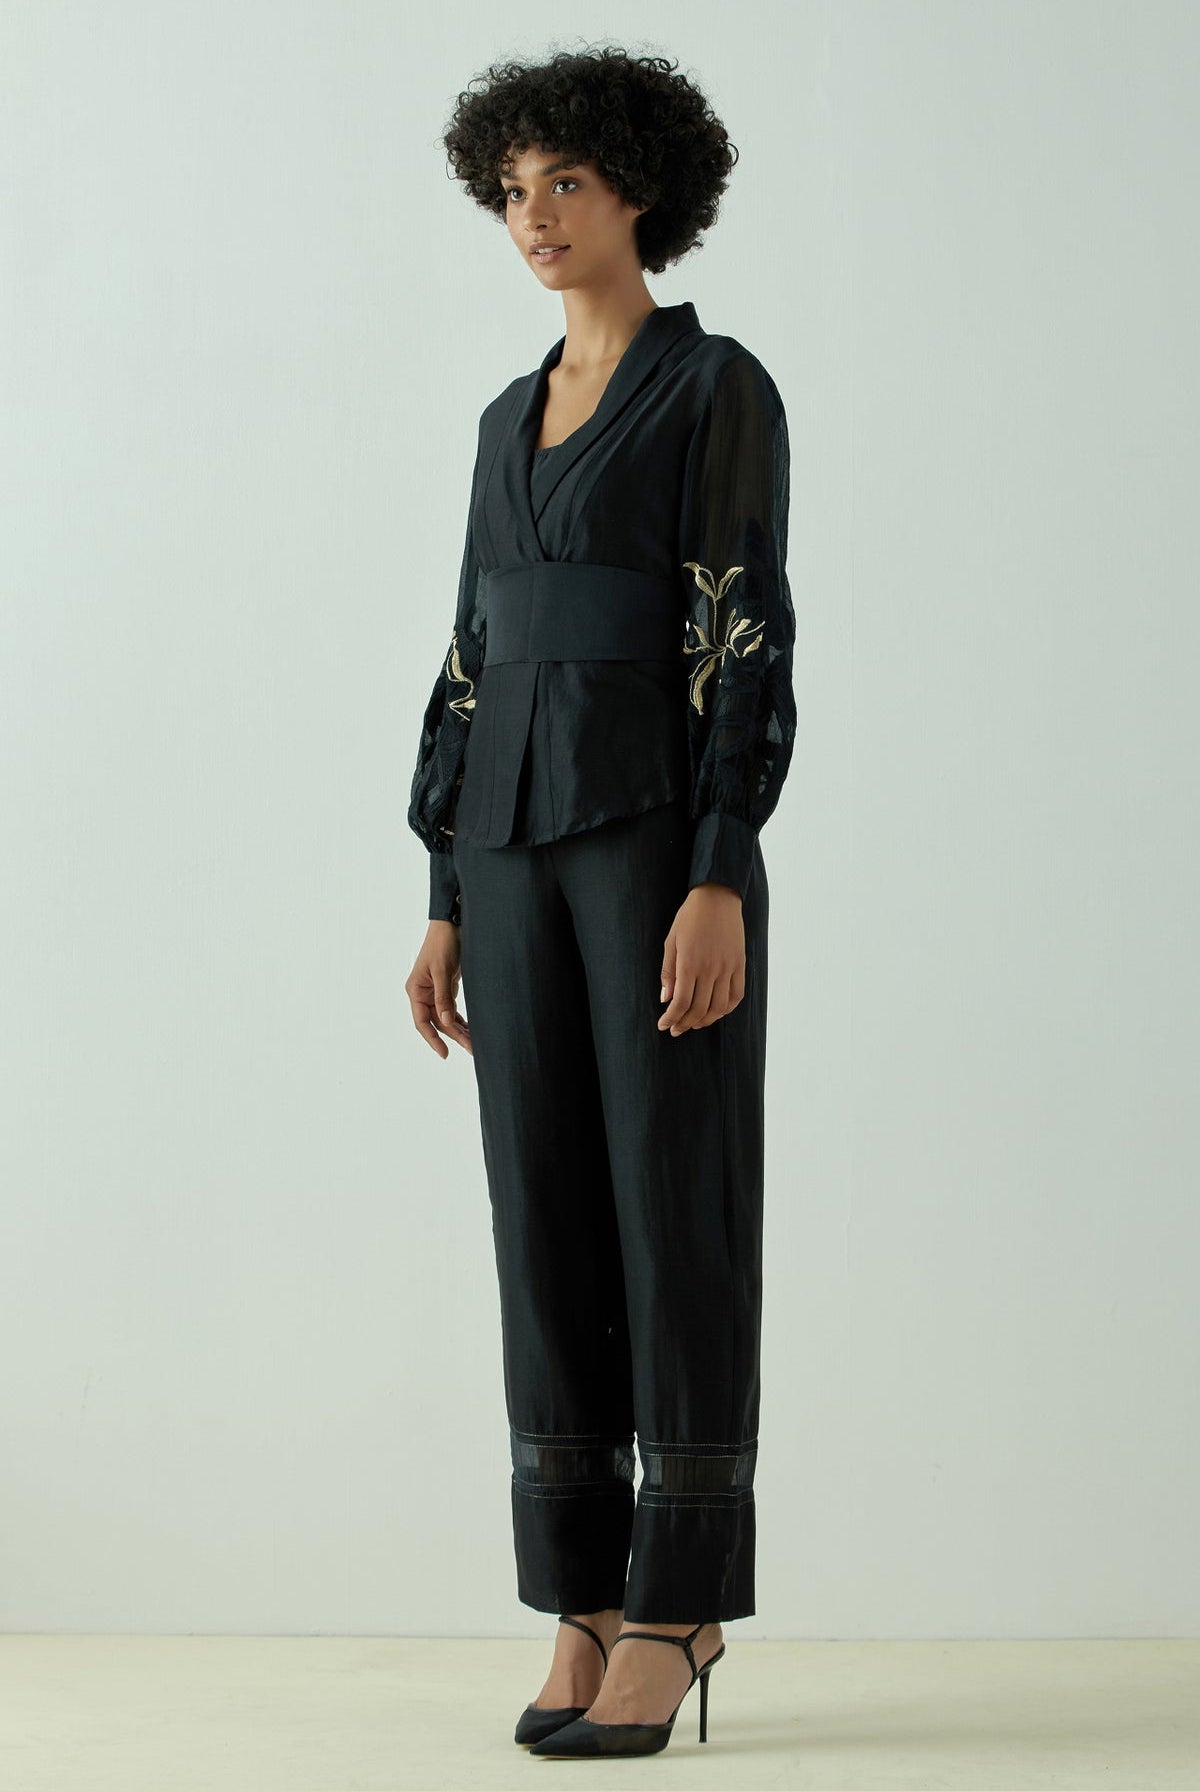 Grace - Wrap Top with Ankle Pants - CiceroniCo-ord SetMadder Much